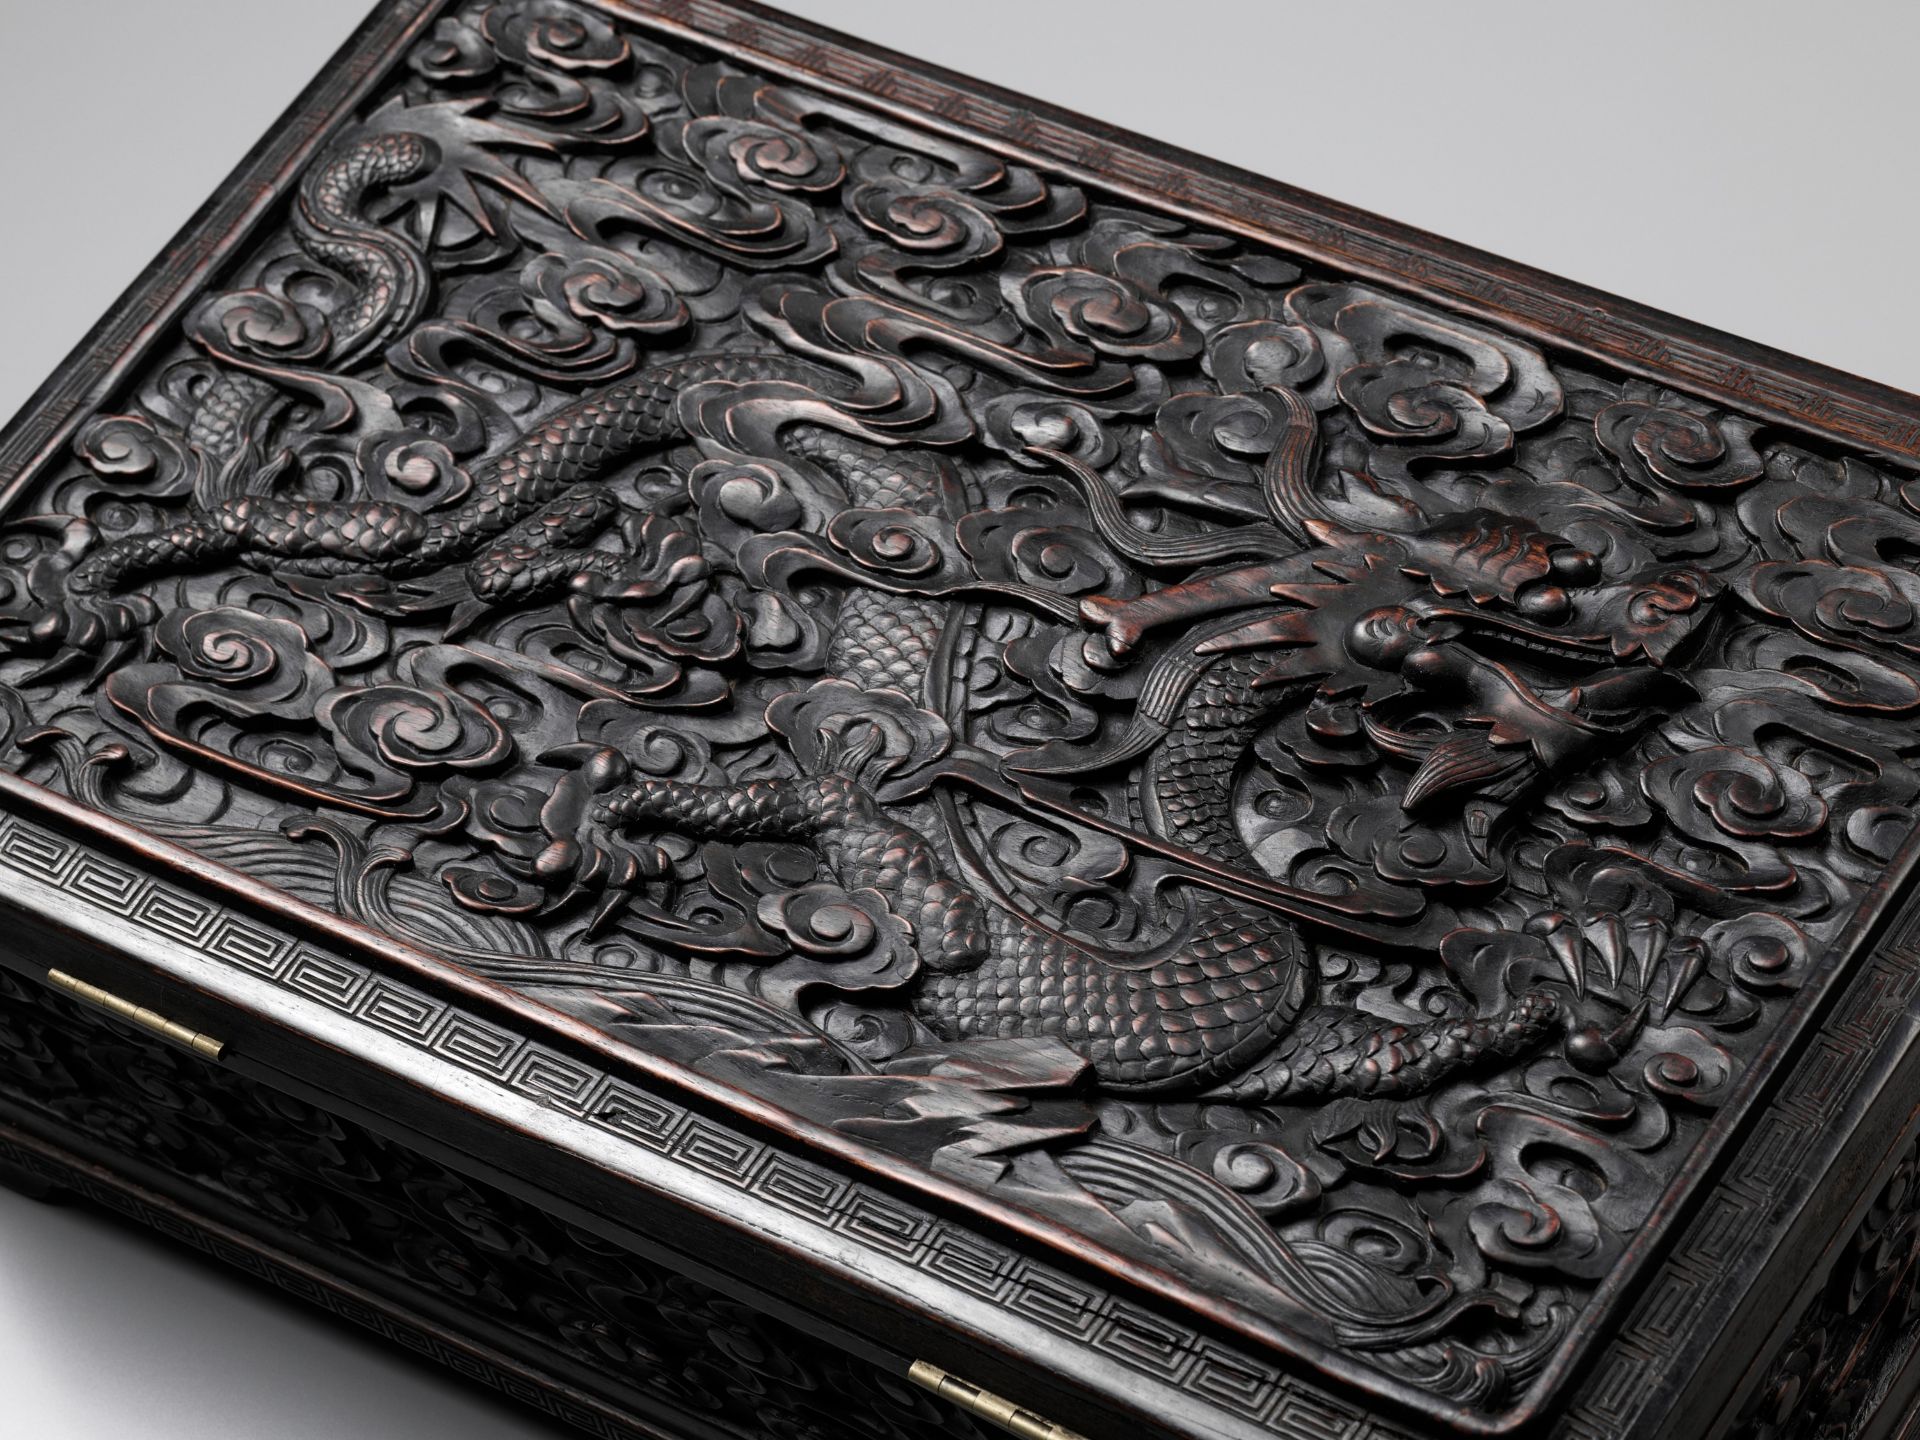 AN IMPERIAL 'DRAGON' HARDWOOD CHEST, COMMEMORATING THE RENOVATION OF THE JADE PEAK PAGODA BY EMPEROR - Image 9 of 11